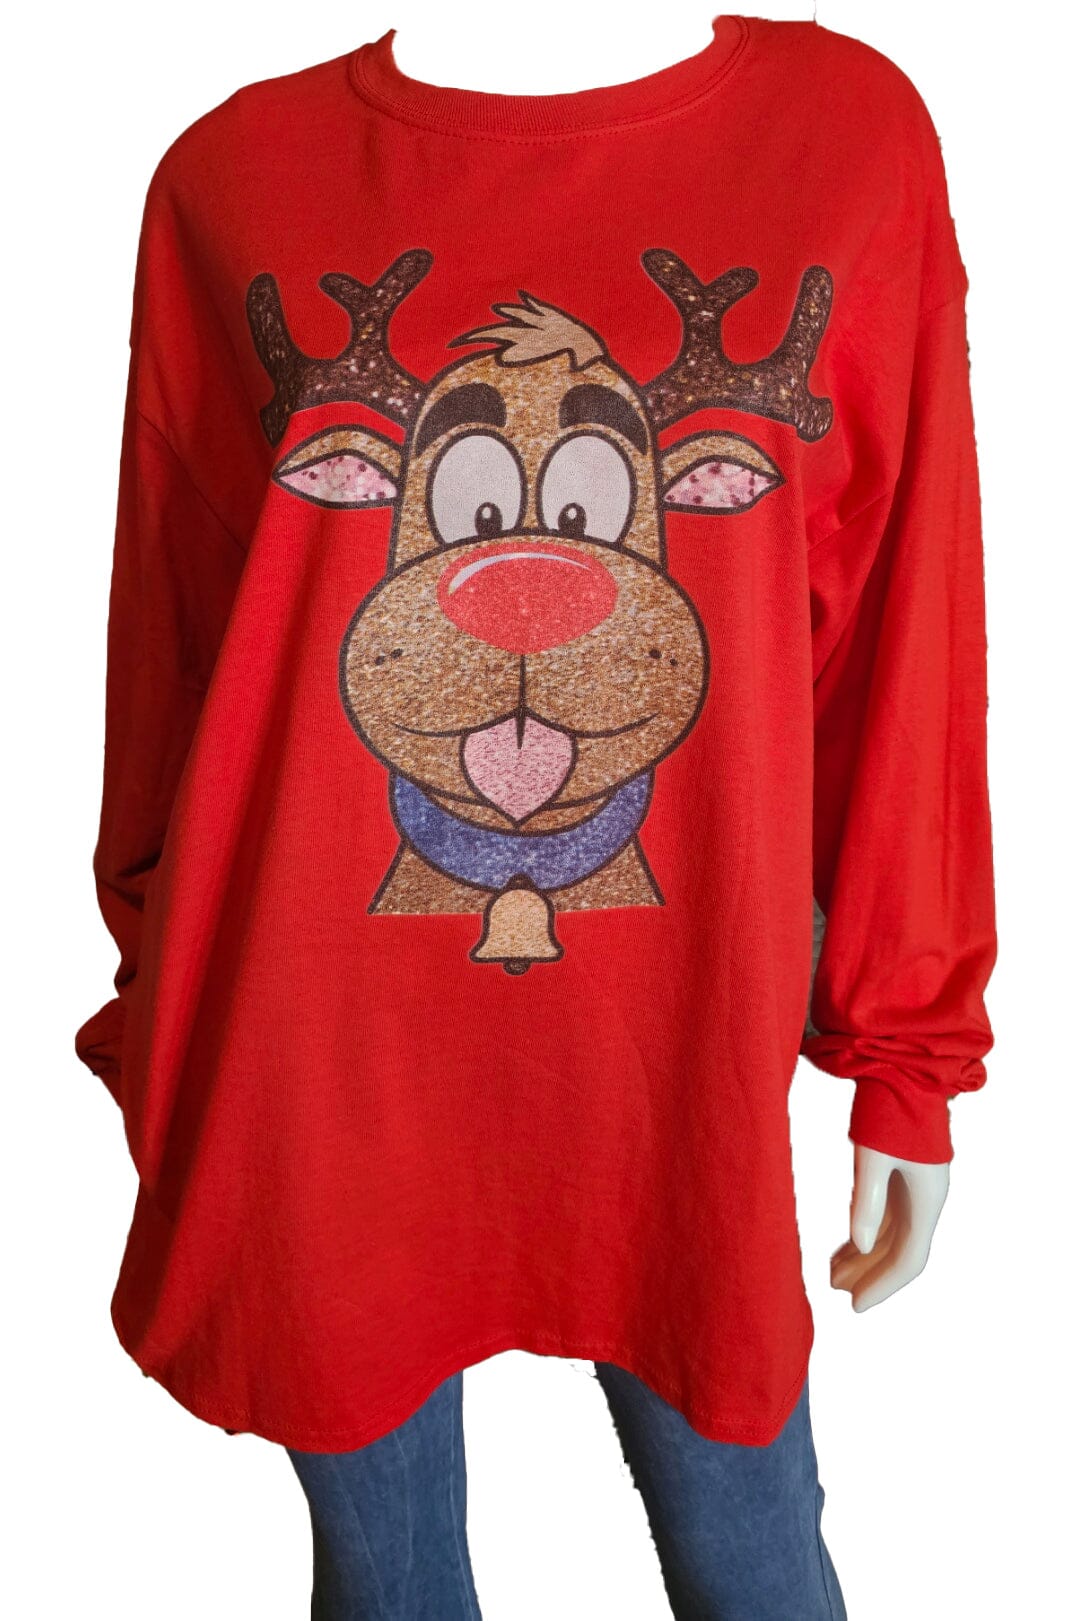 Glittery Rudolph Graphic Tee graphic tees VCC 